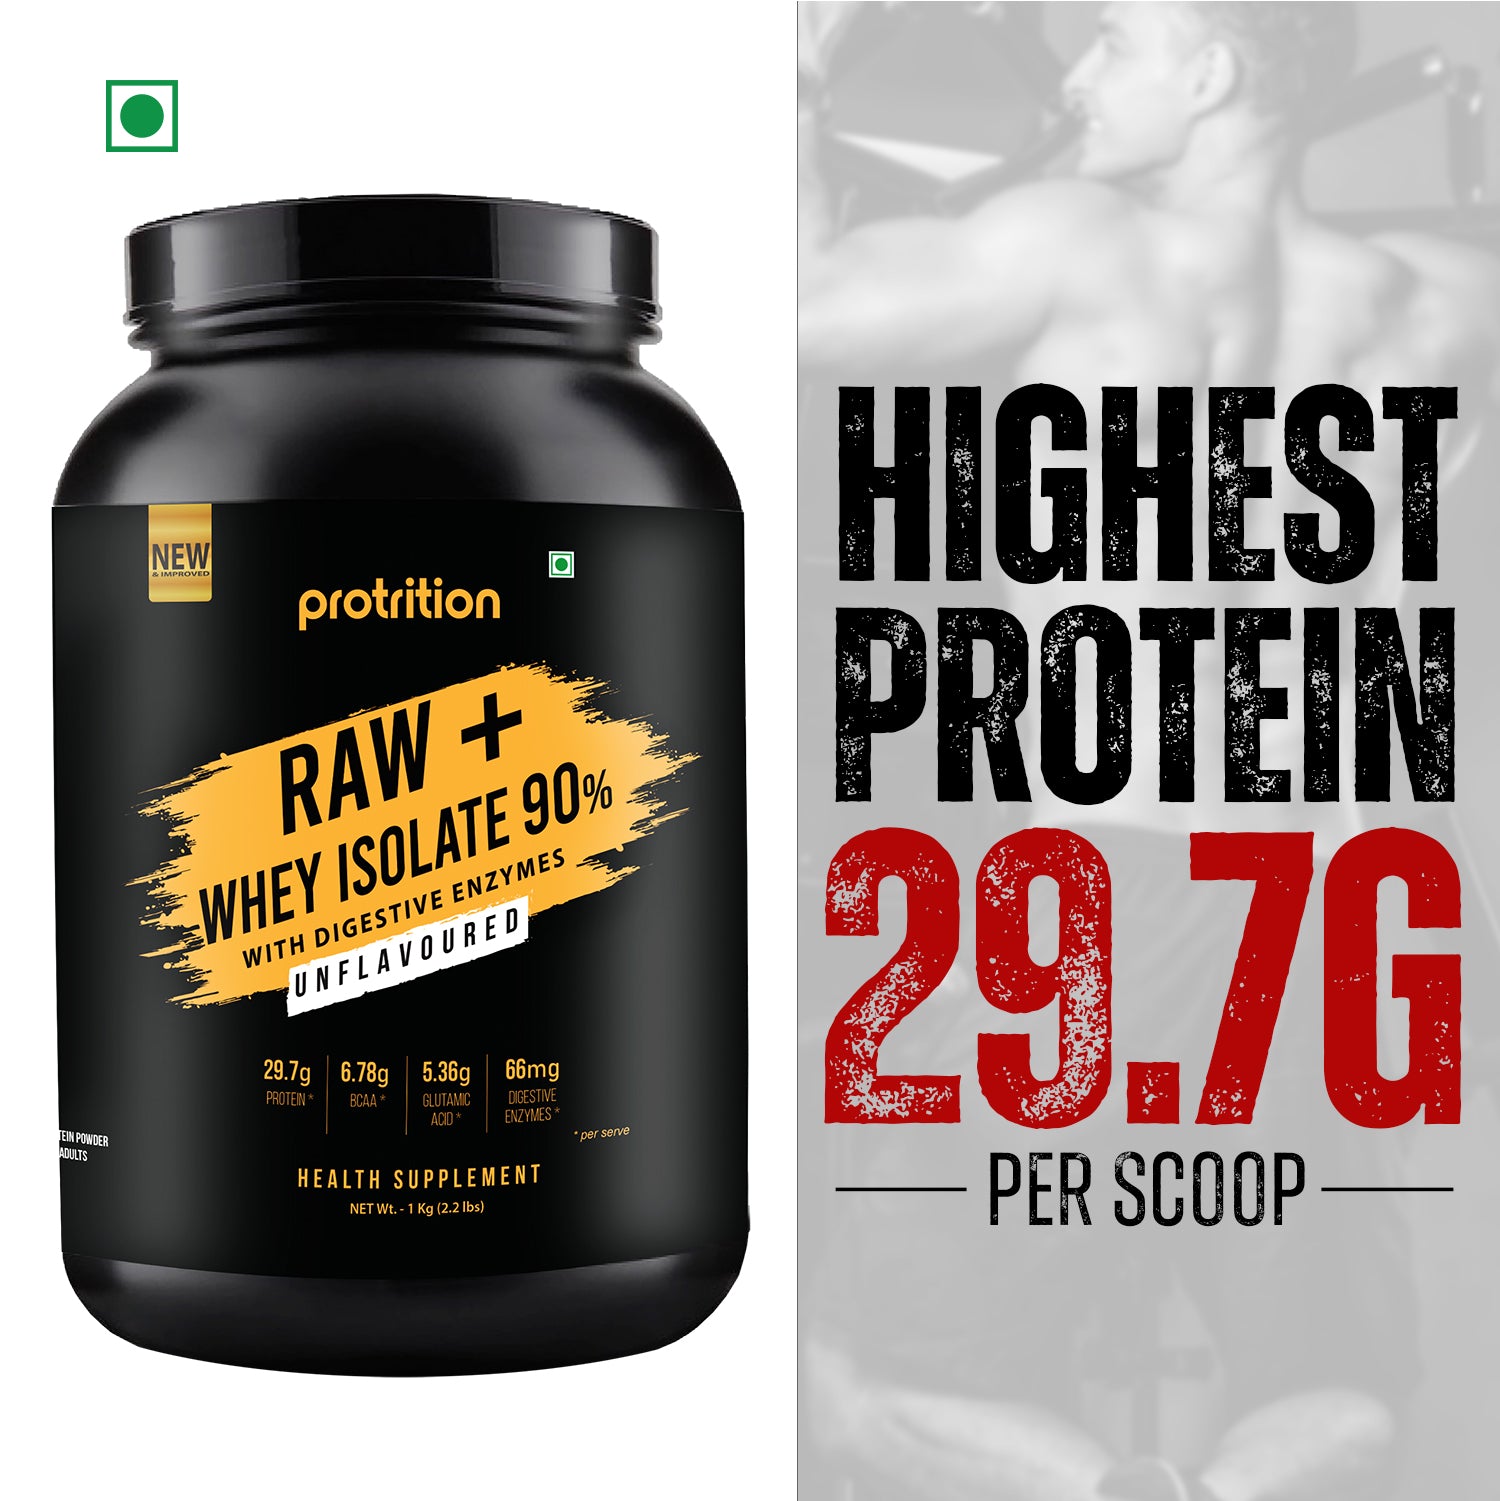 Protrition Raw+Whey Protein Isolate 90%, Unflavoured, 1Kg